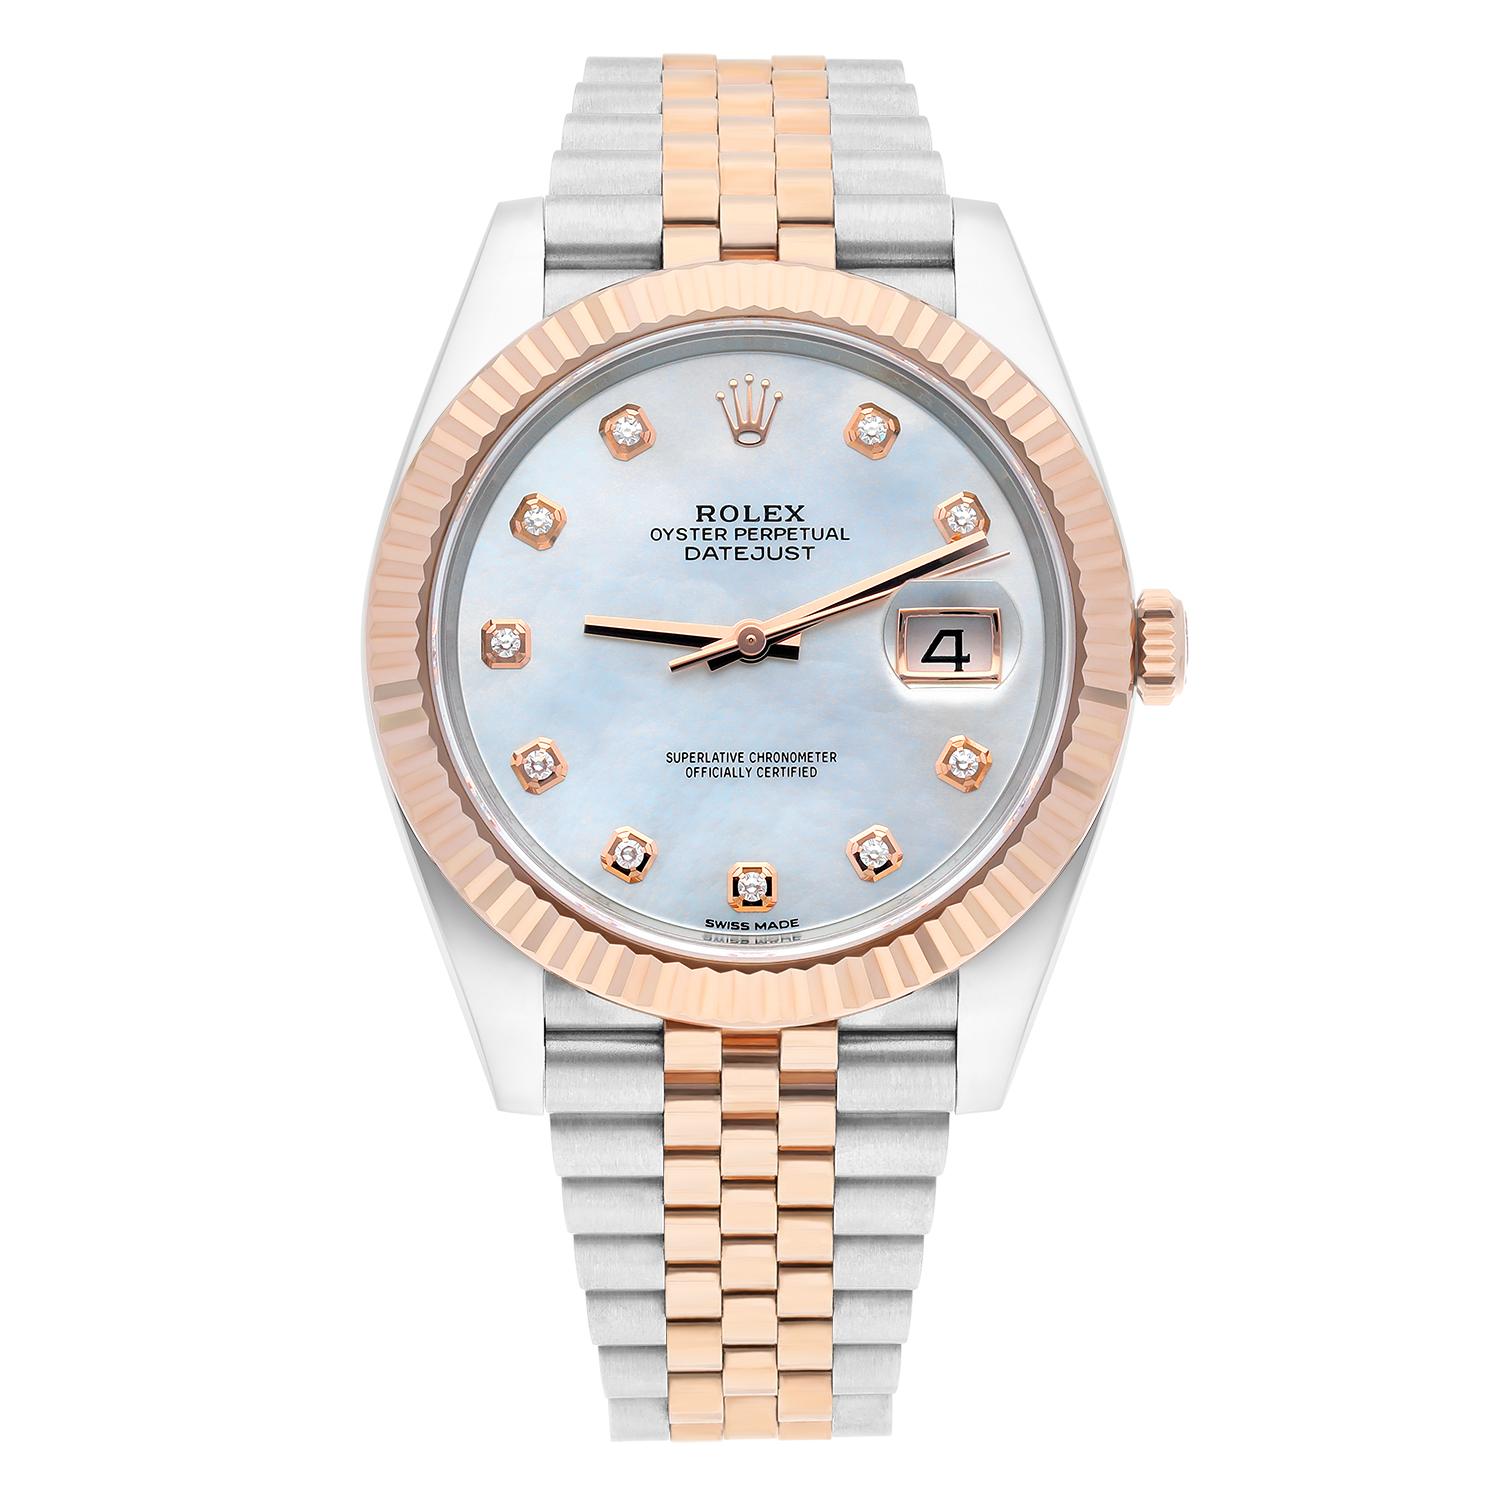 41mm Everose Rolesor case with 904L steel monobloc middle case, screw-down steel back, 18K Everose gold screw-down crown, 18K Everose gold fluted bezel, scratch-resistant double anti-reflective sapphire crystal with cyclops lens over the date,